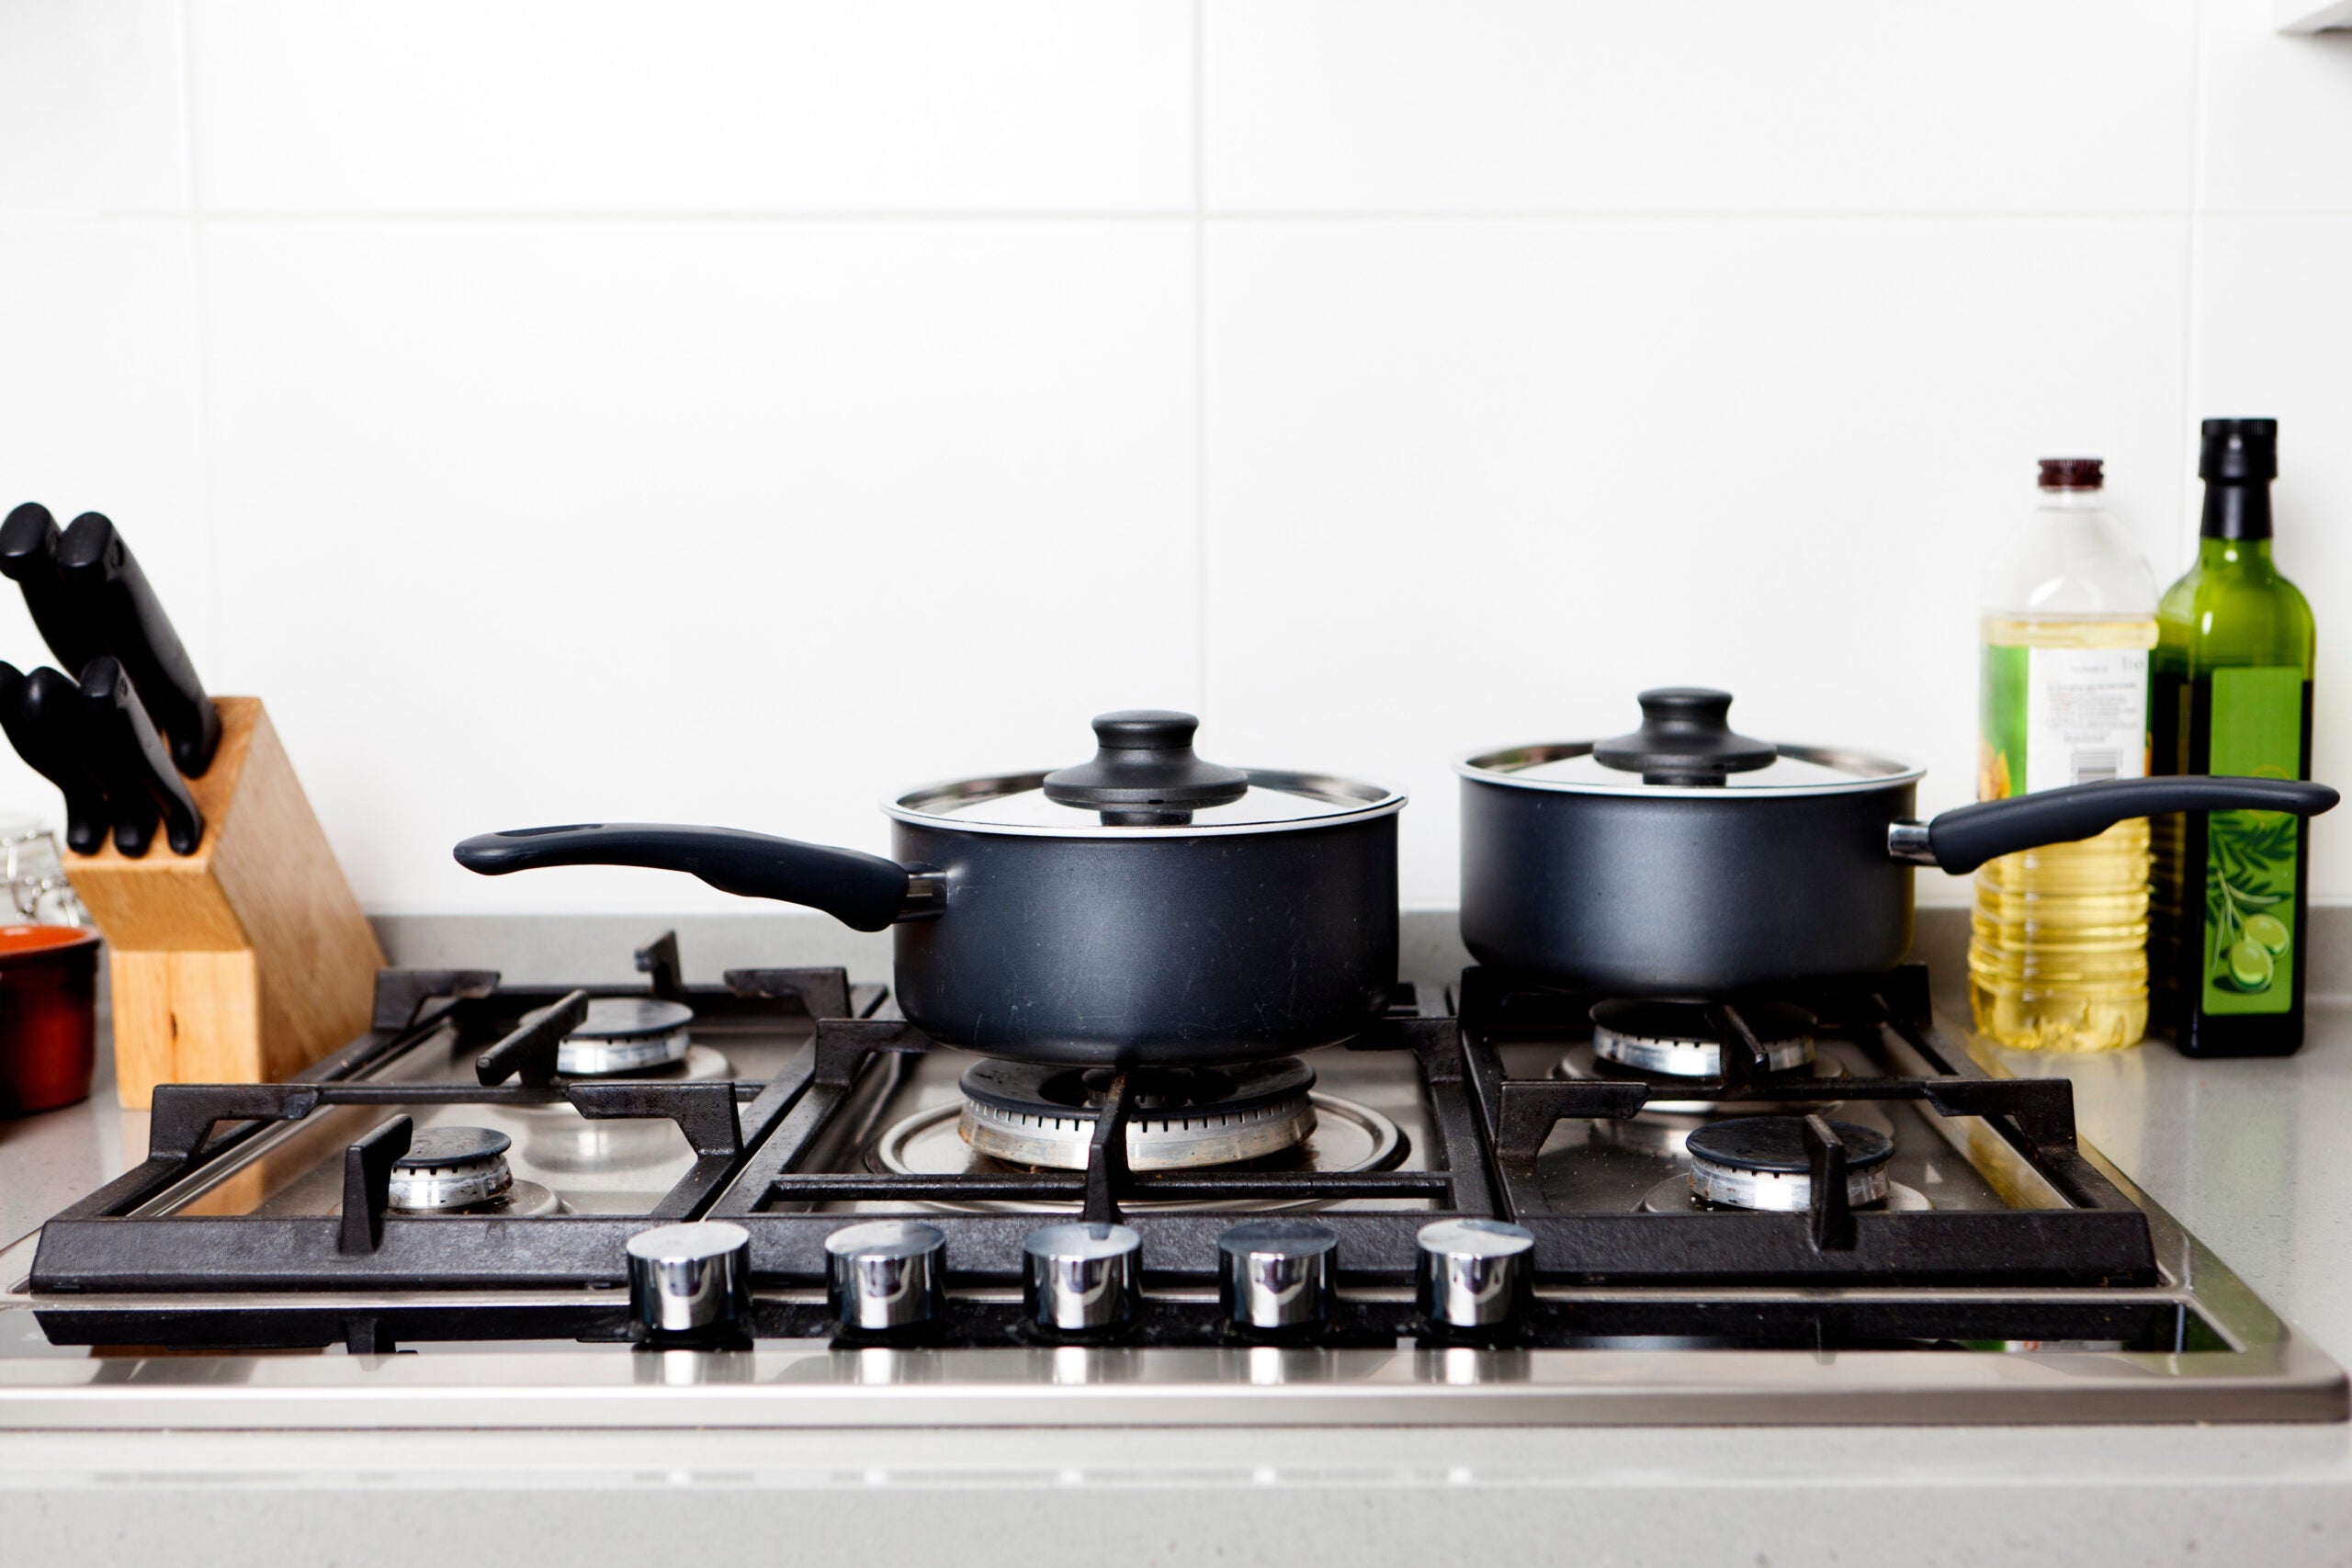 Best Cookware for Glass Top Stoves in 2022